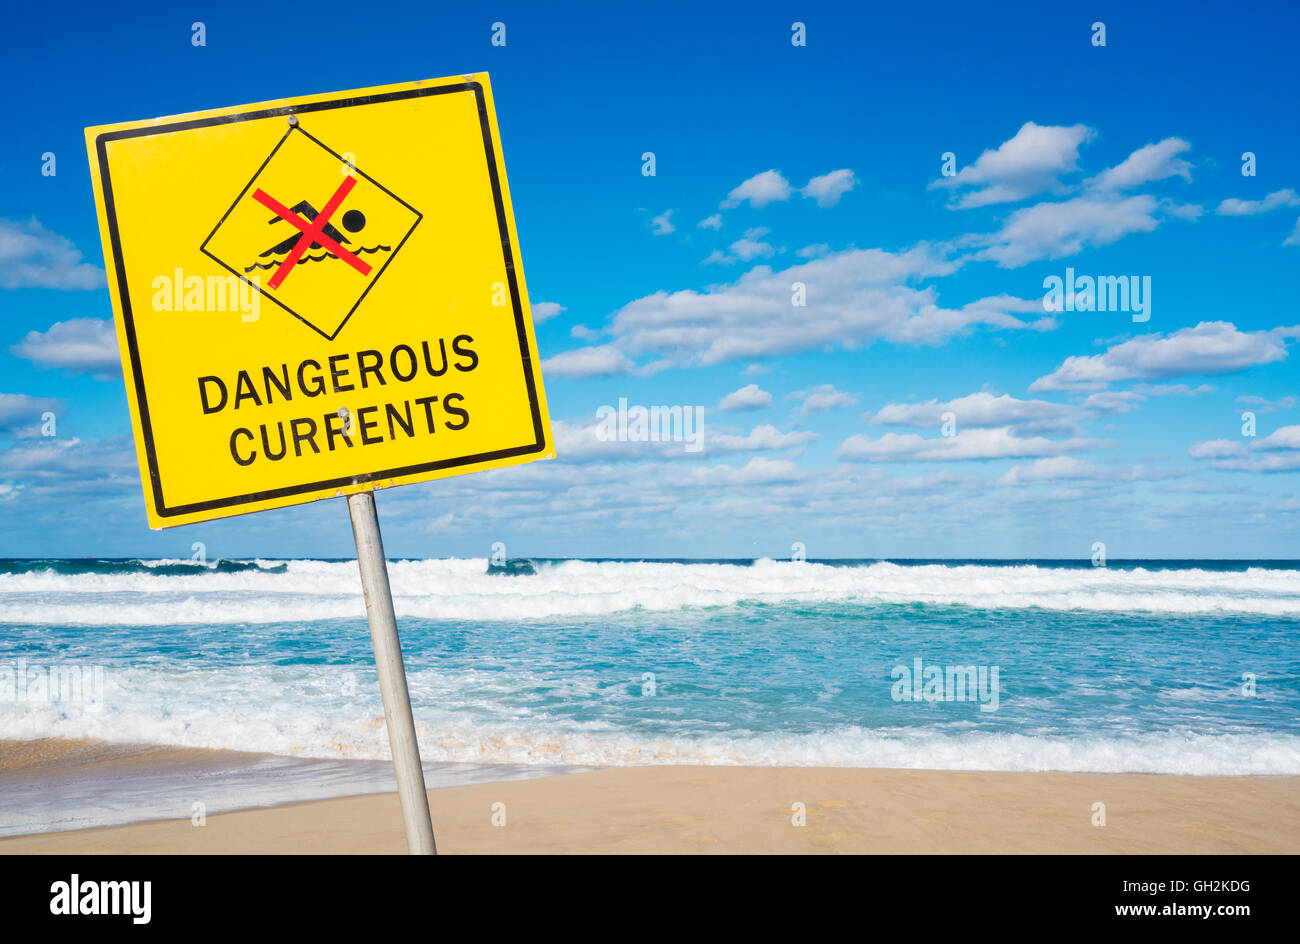 Dangerous currents sign on a beach Stock Photo